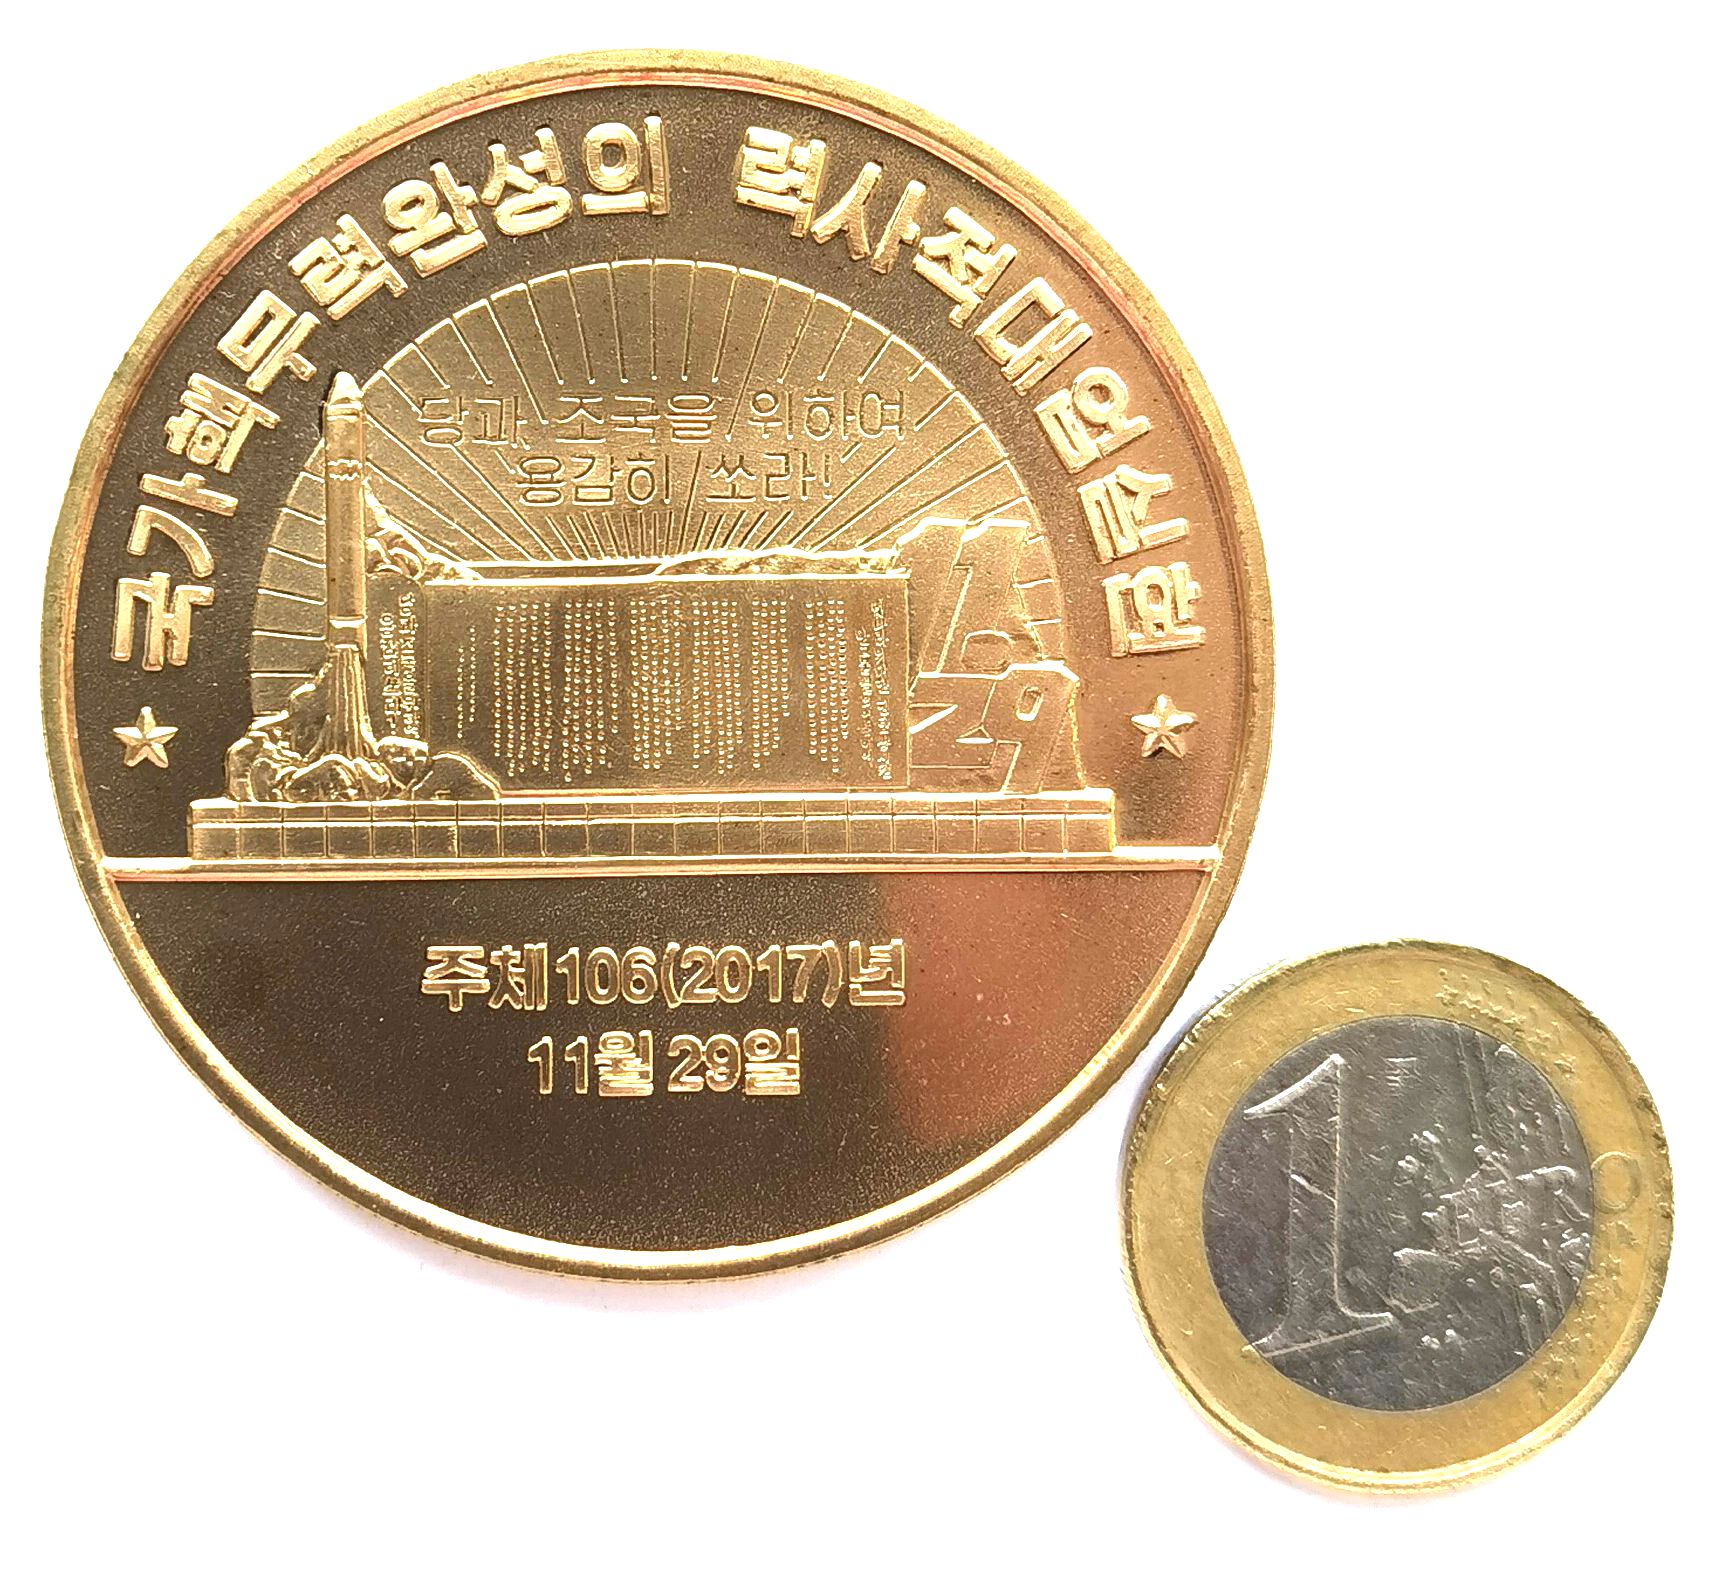 L7040, Korea “Nuclear Industry Weapon” Large Brass Coin, 10 Won, 2019